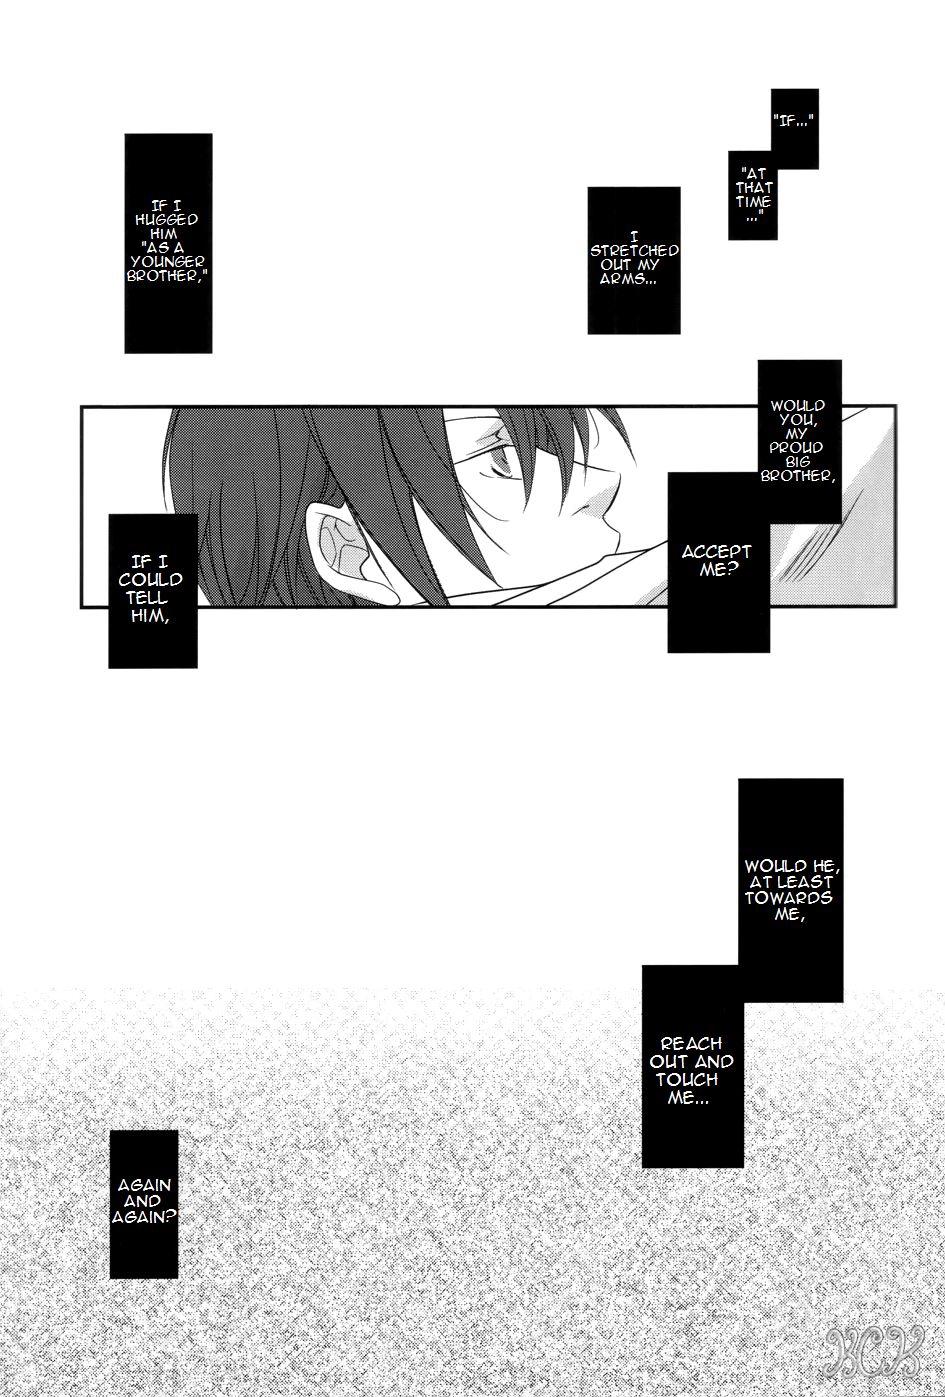 Solo Female However, It's Beloved, Isn't It? - Durarara Condom - Page 6